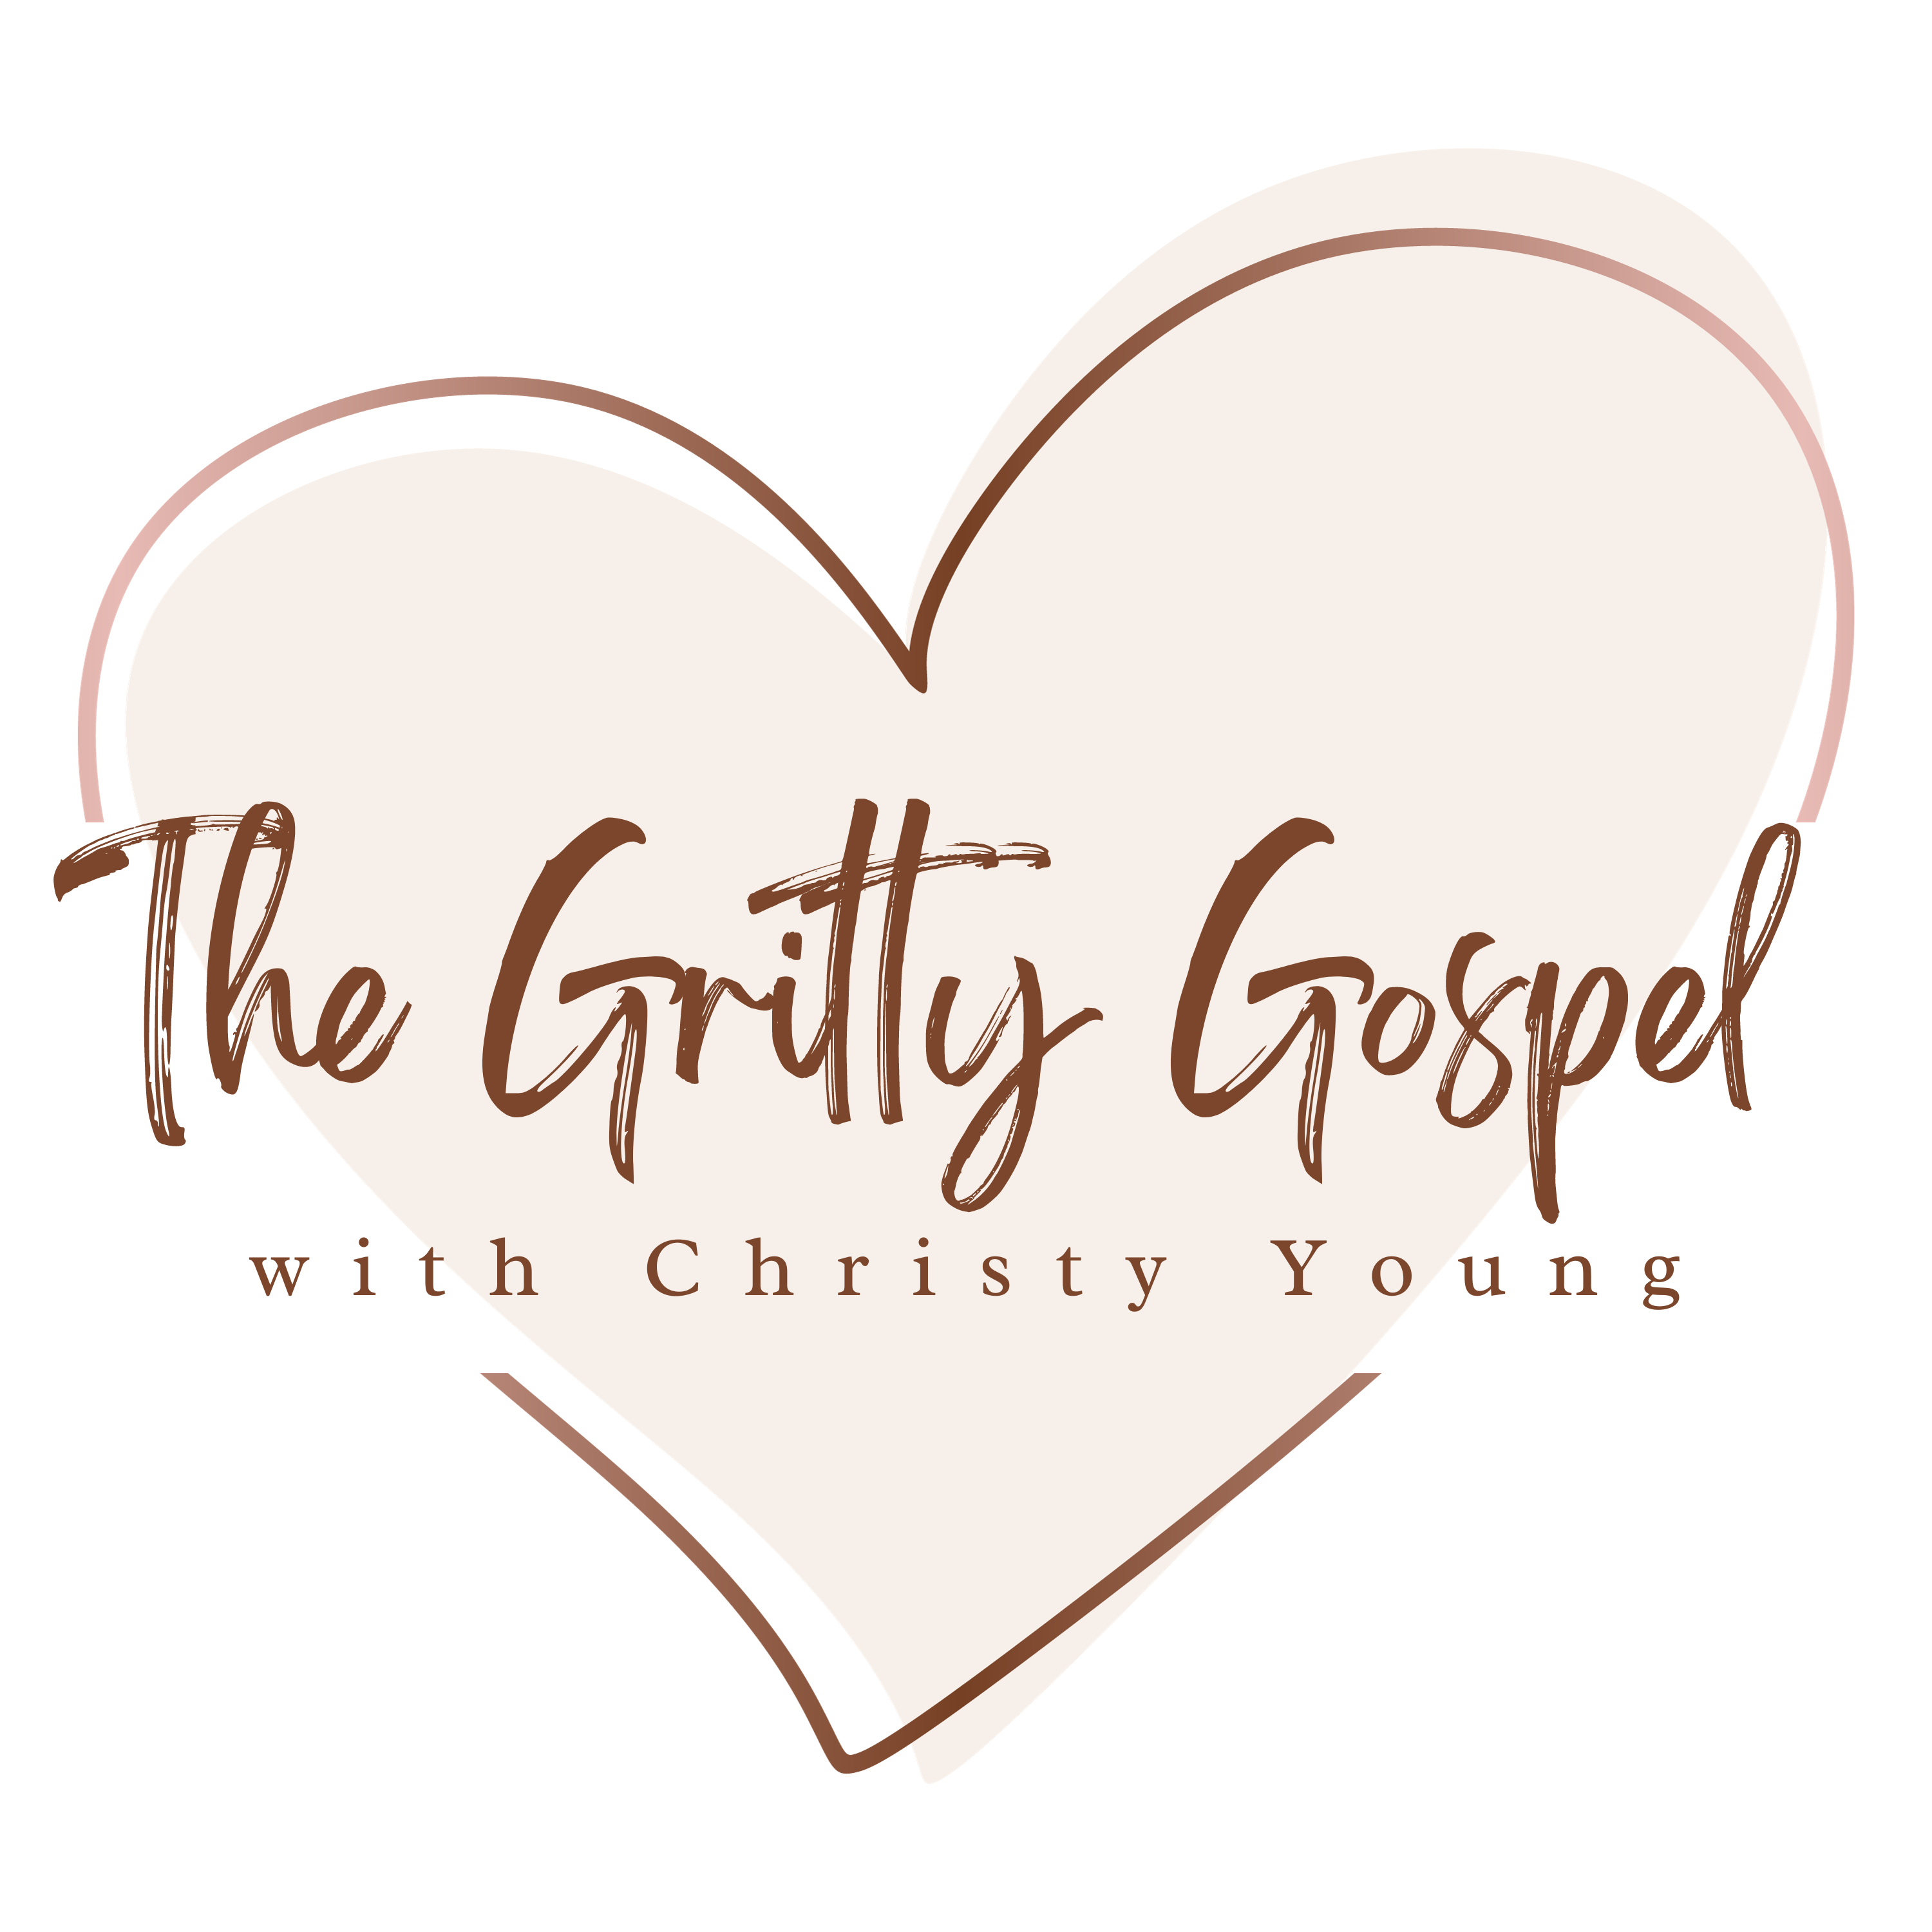 The Gritty Gospel with Christy Young